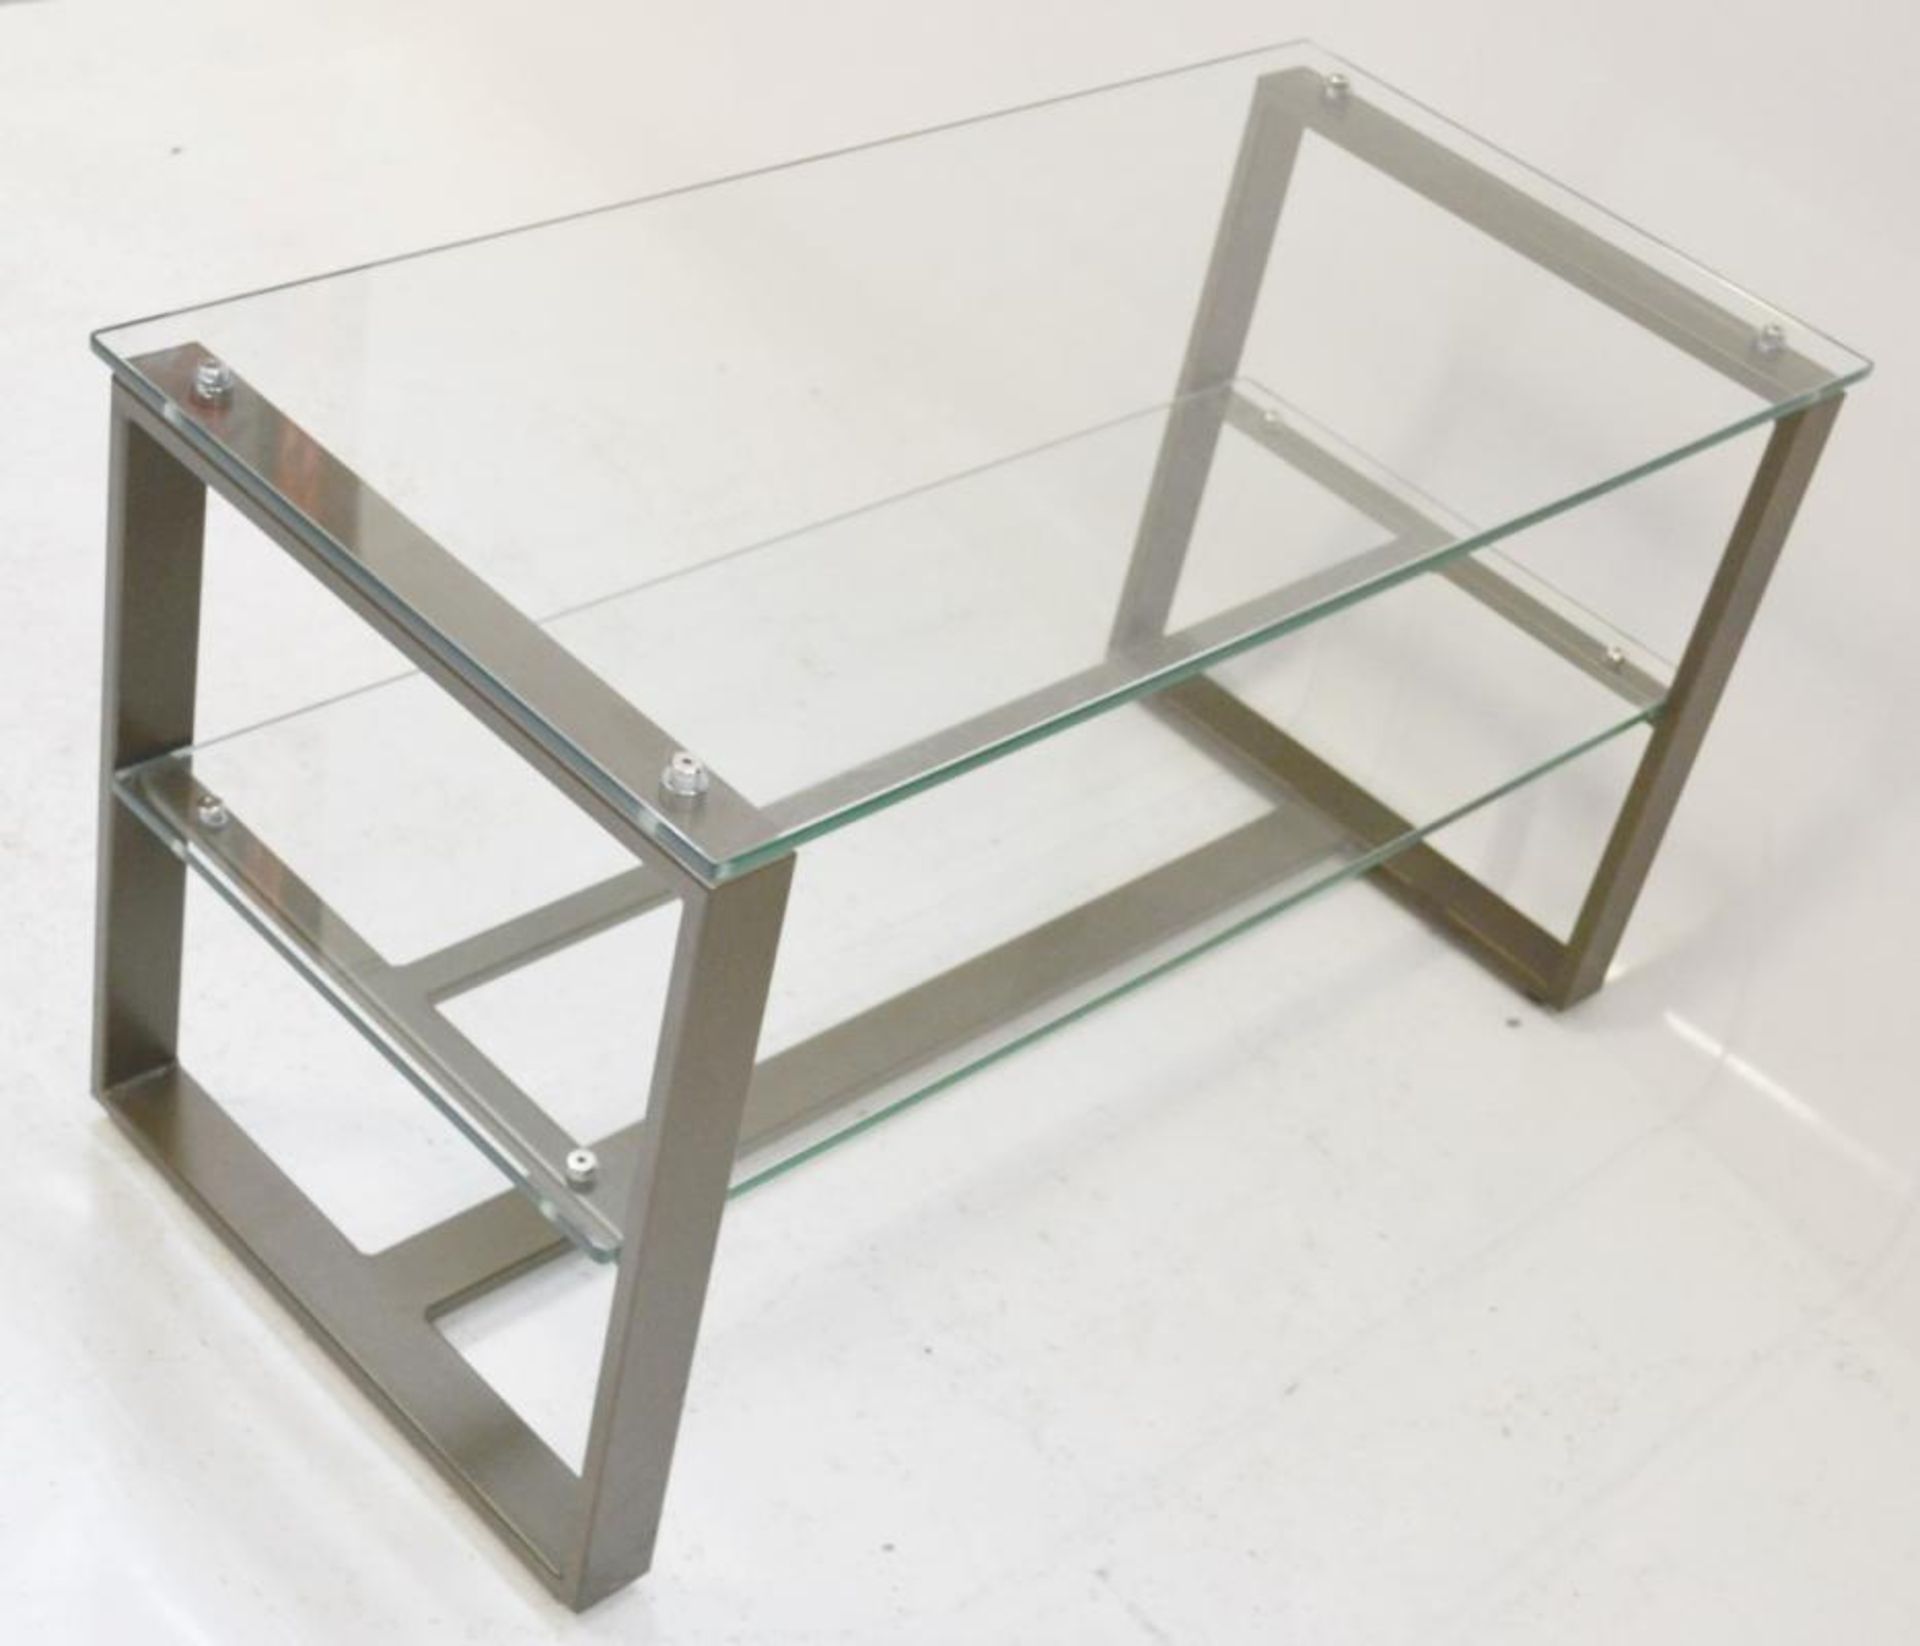 8 x Small Contemporary Retail Glass Display Units With Sturdy Metal Frames and Two Shelves - - Image 4 of 8